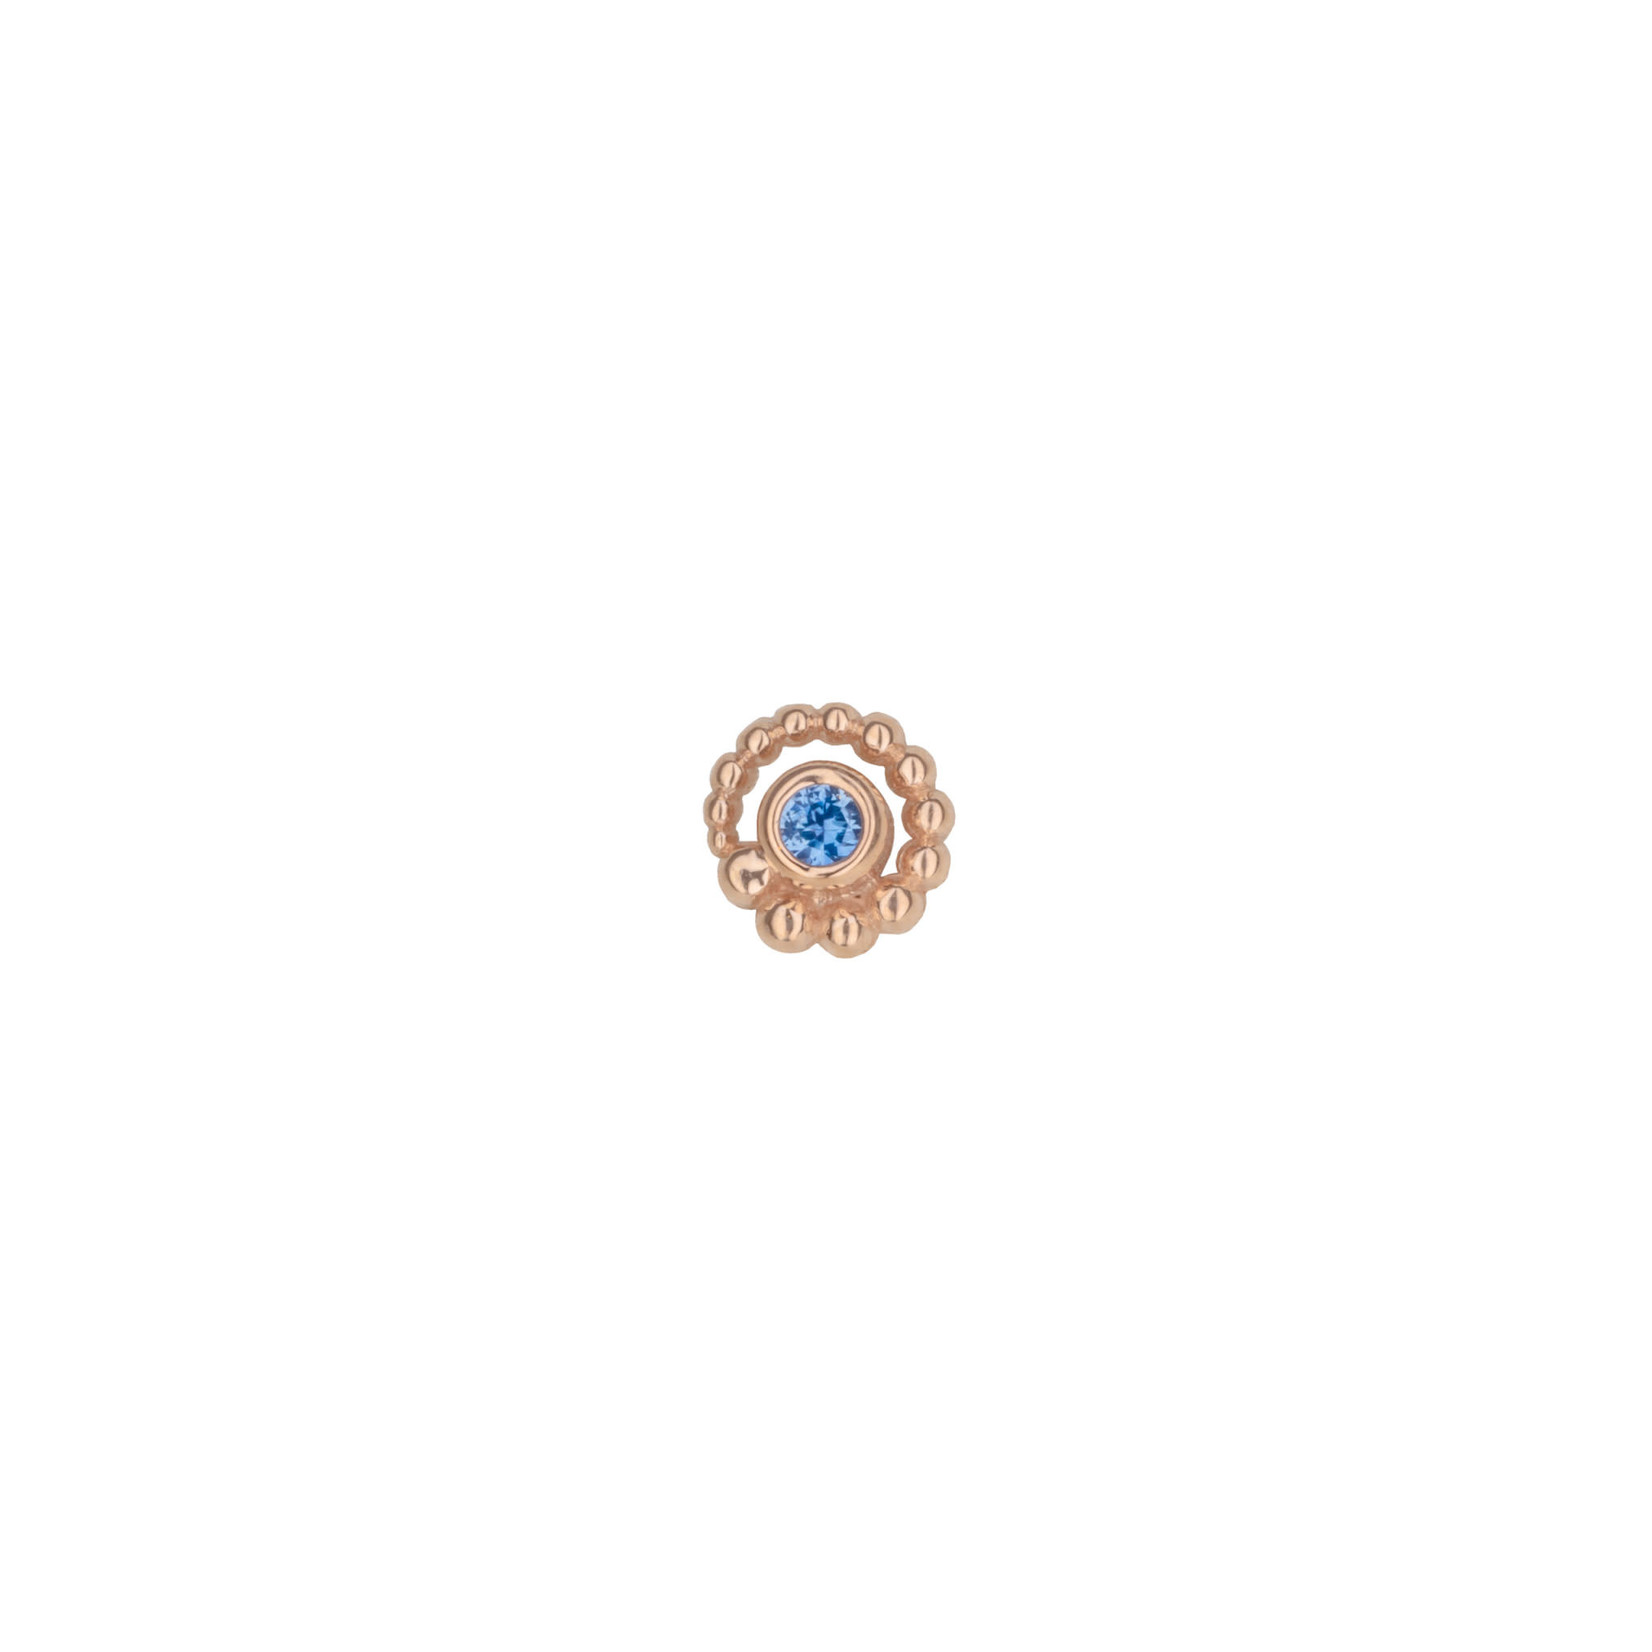 BVLA 18g BVLA rose gold "Beaded Bezel Swirl" press-fit end with 2.0 polar sapphire, graduating to the right